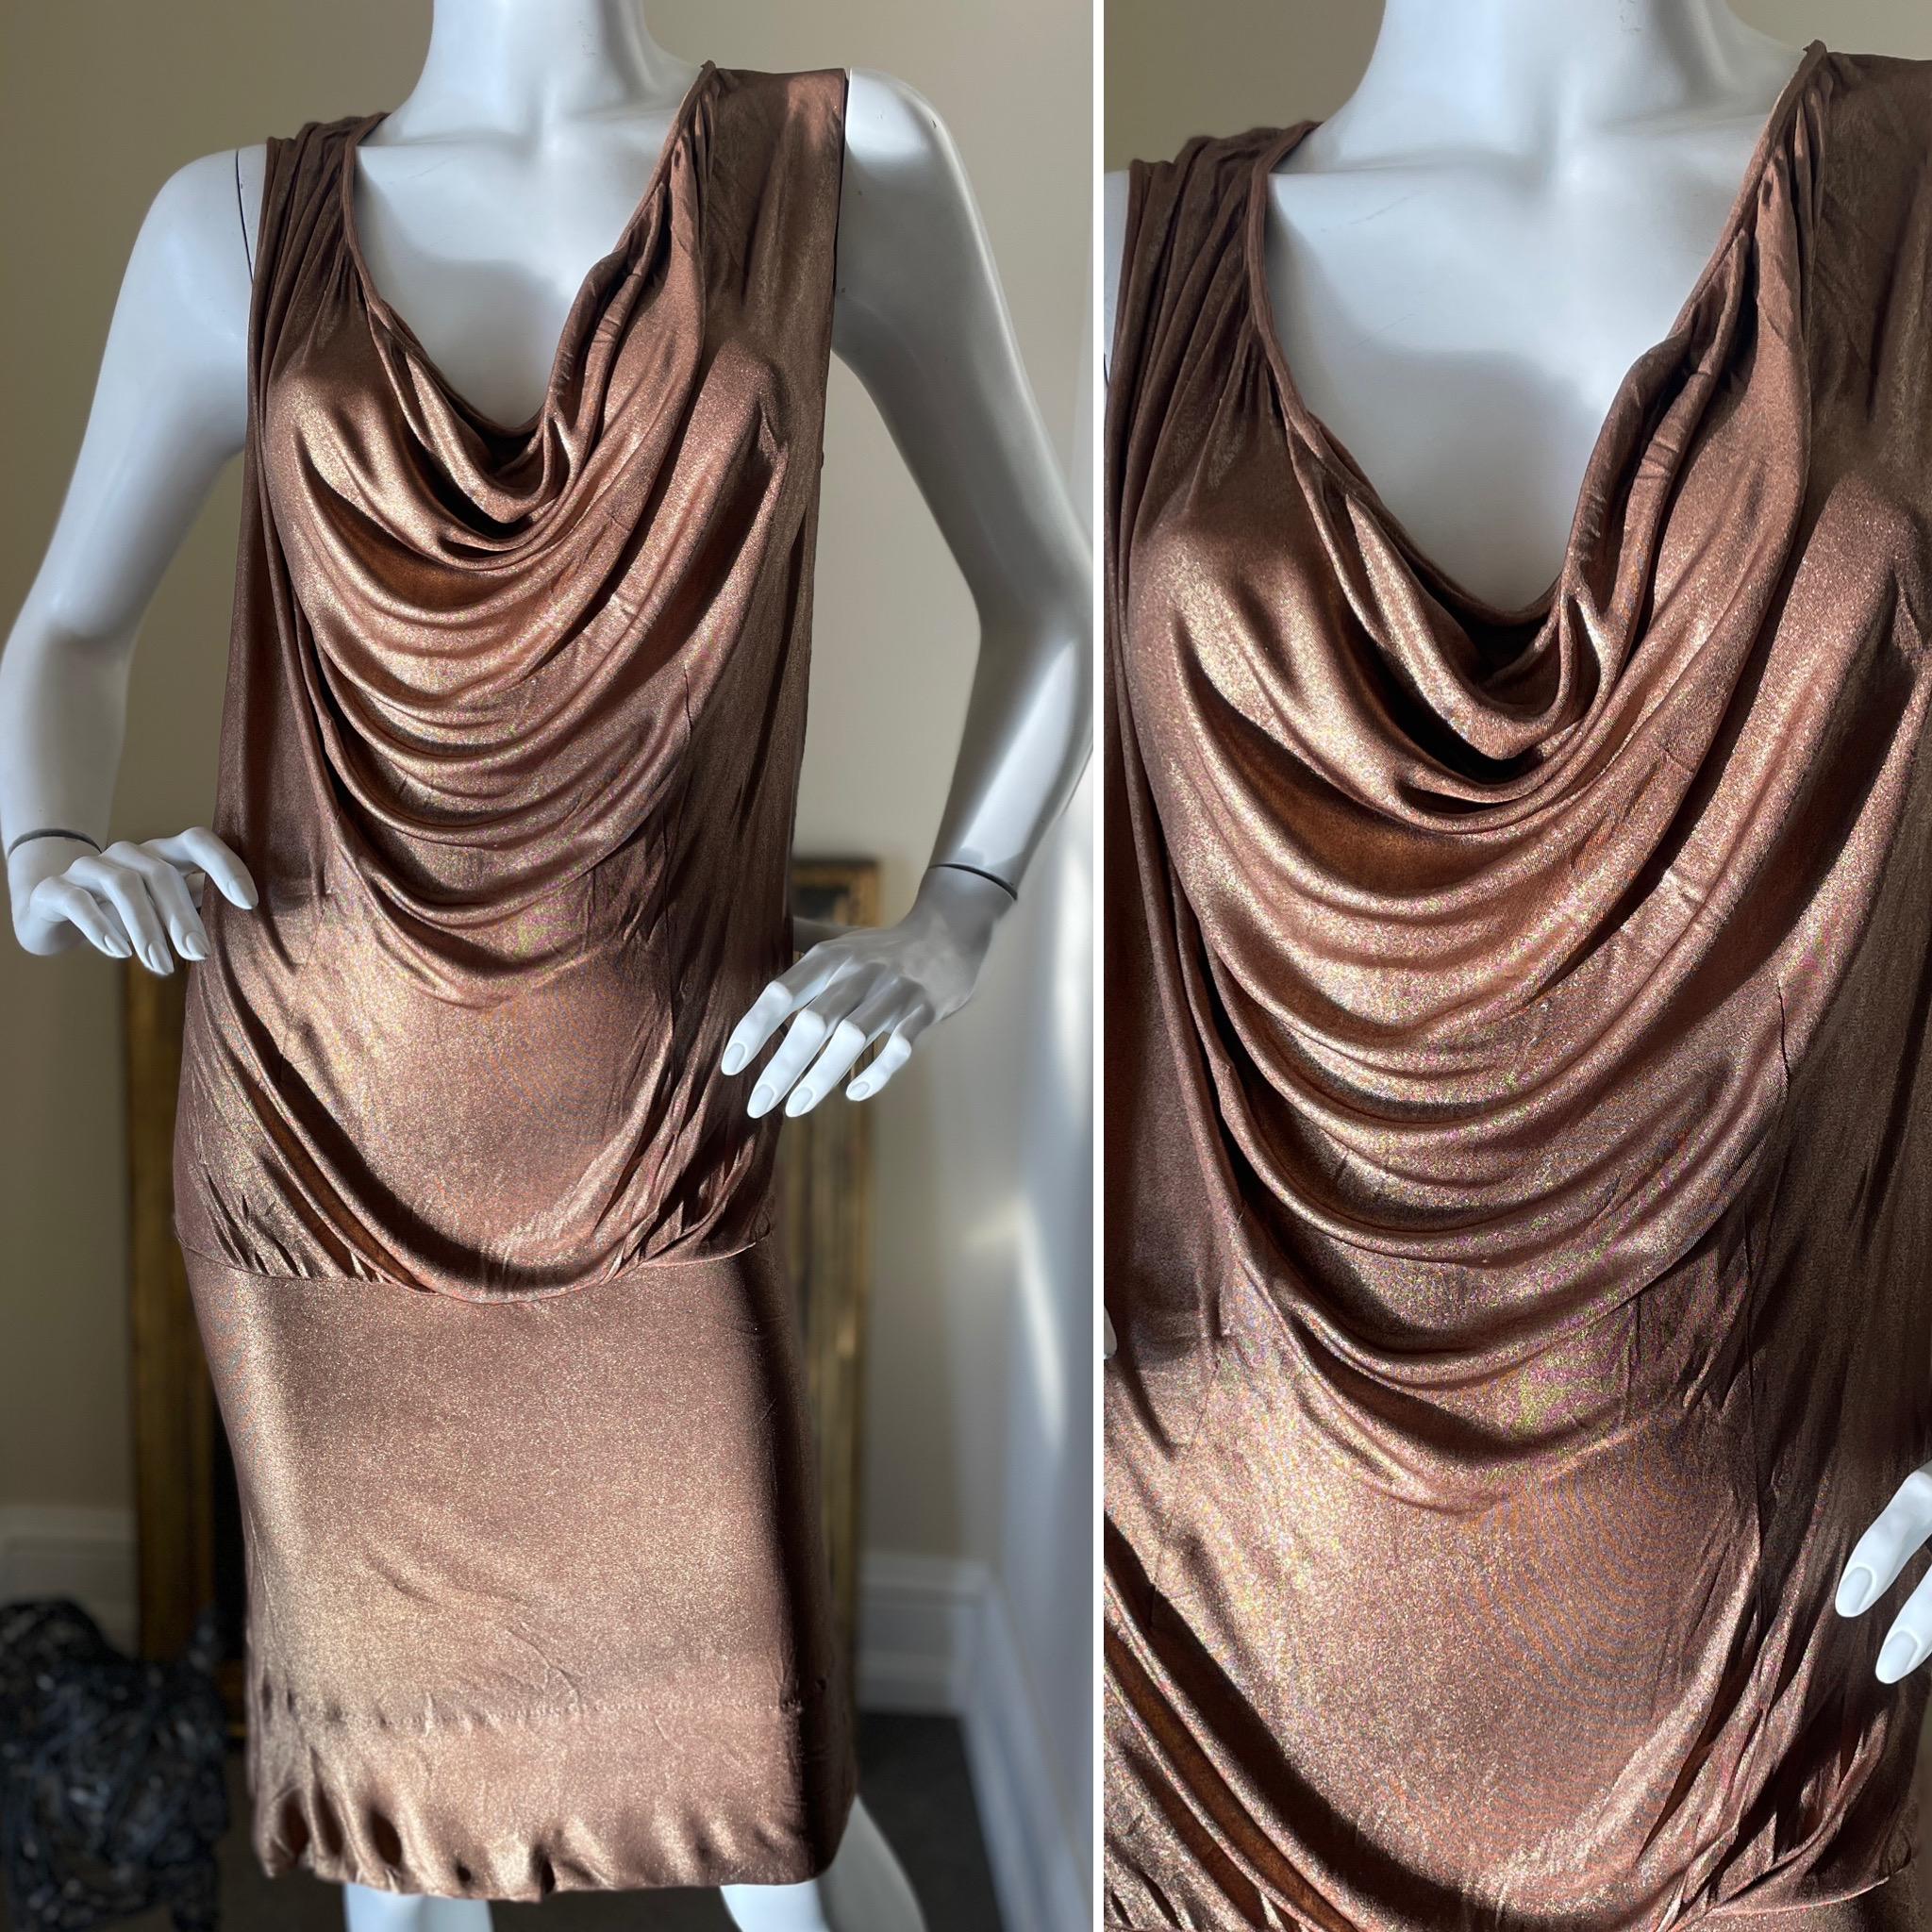 Gucci by Tom Ford Metallic Bronze Draped Cocktail Dress 
Size Small but runs large due to the cut
Please check measurements
Bust 42